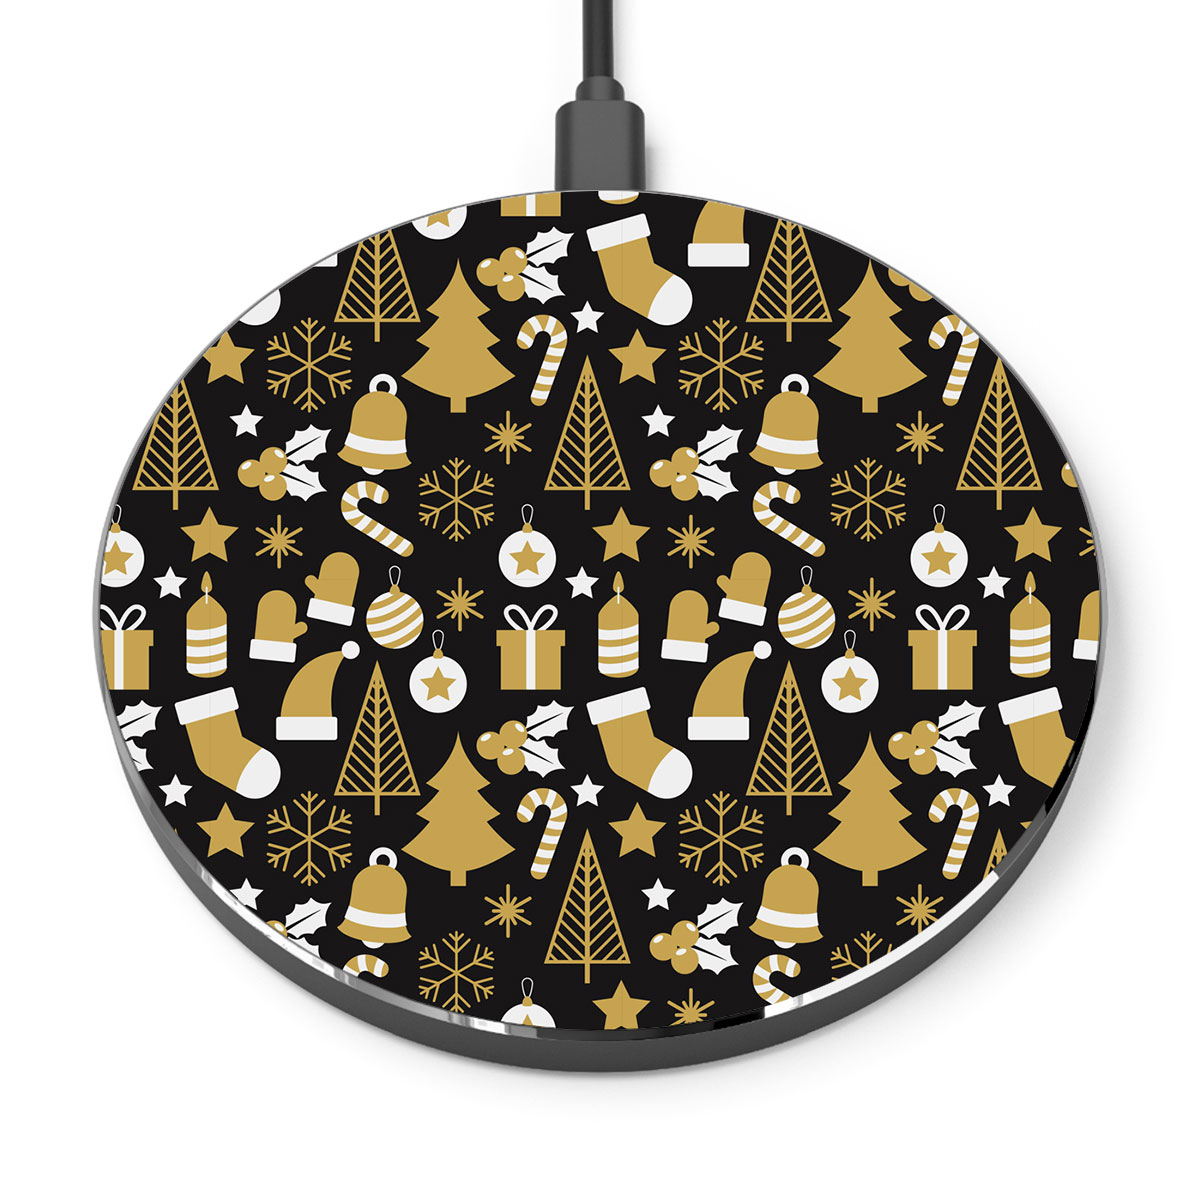 White And Gold Christmas Socks, Christmas Tree, Candy Cane On Black Background Printed Wireless Charger